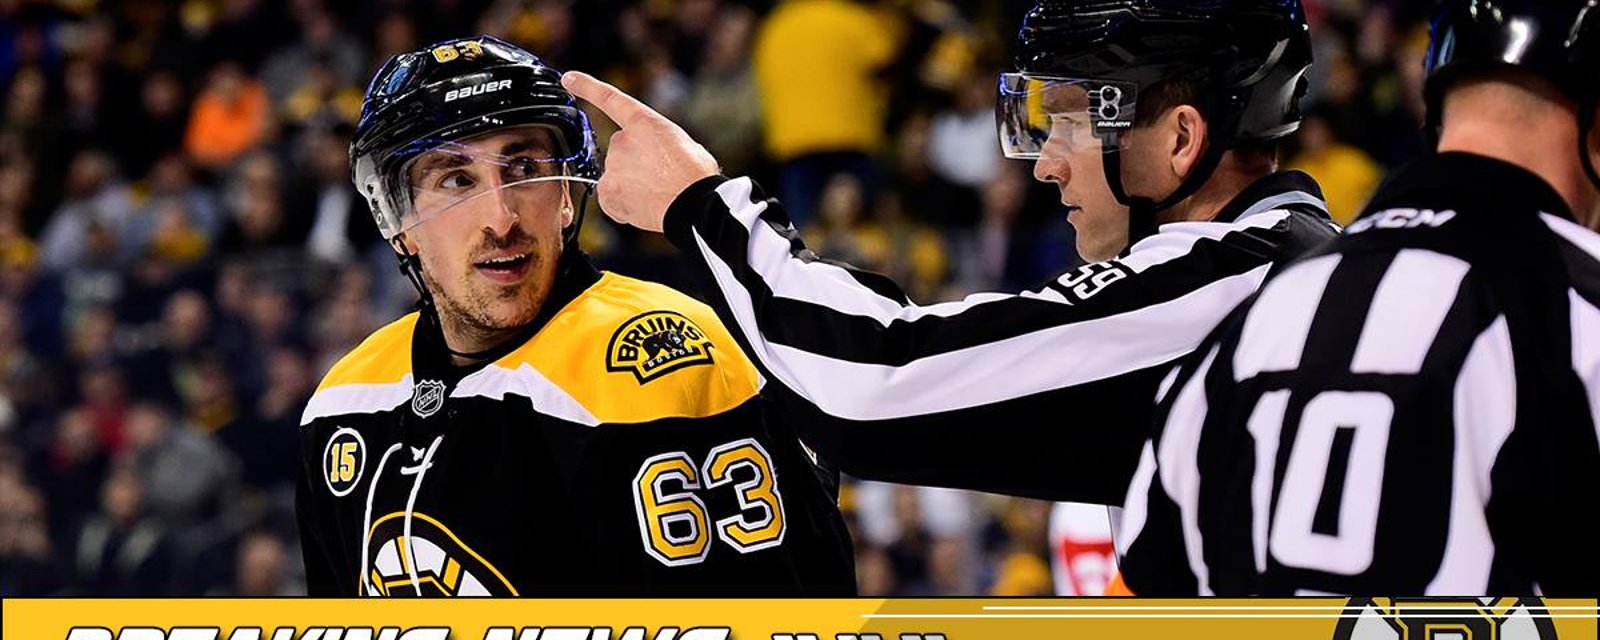 Breaking: Bruins announce bad news for star forward Brad Marchand. 